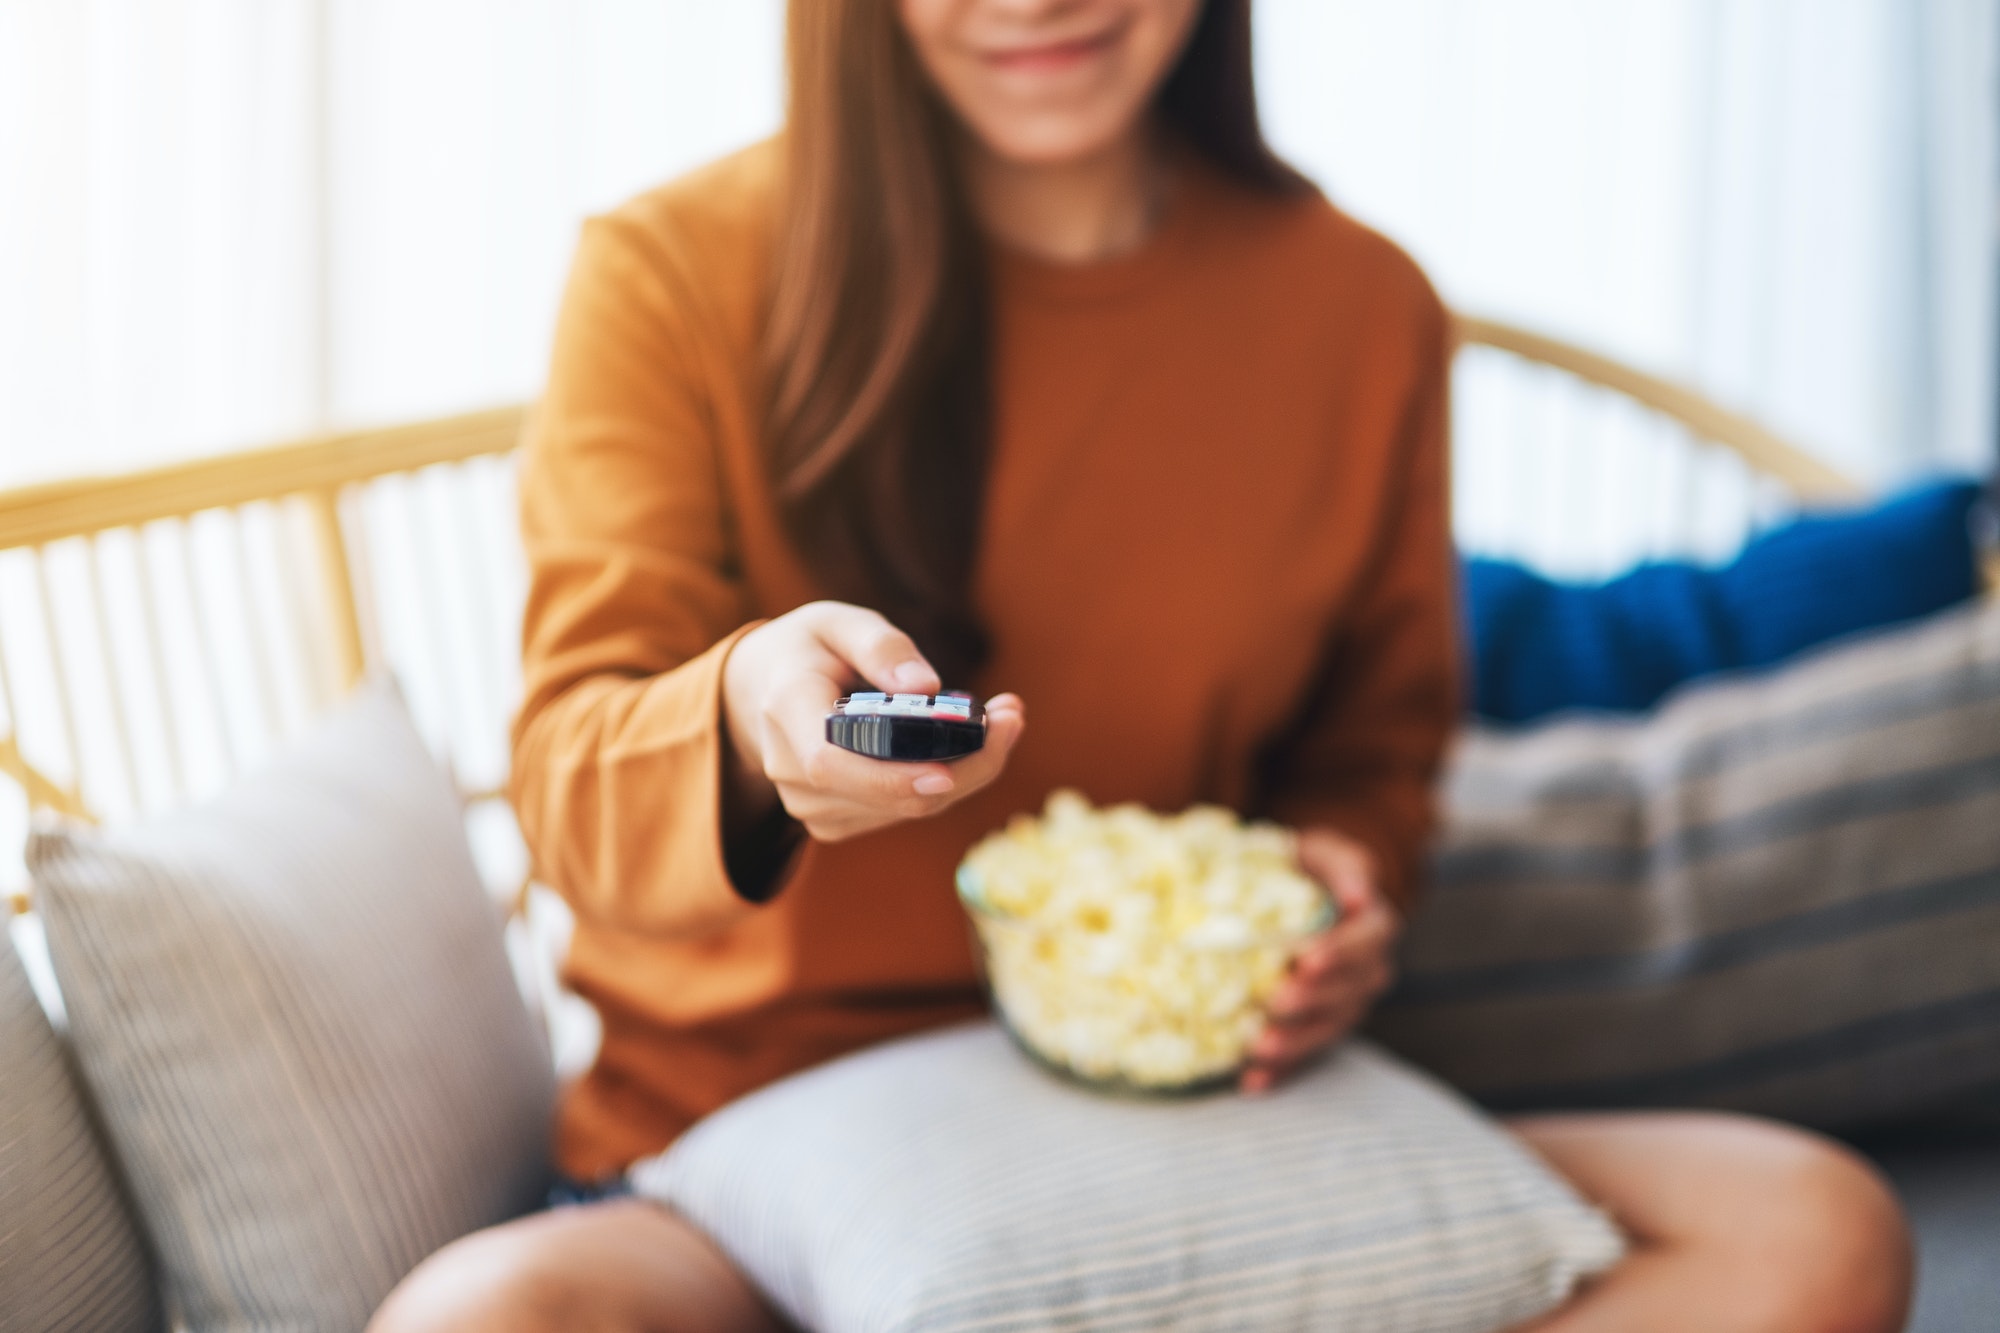 a woman eating pop corn and searching channel with remote control to watch tv